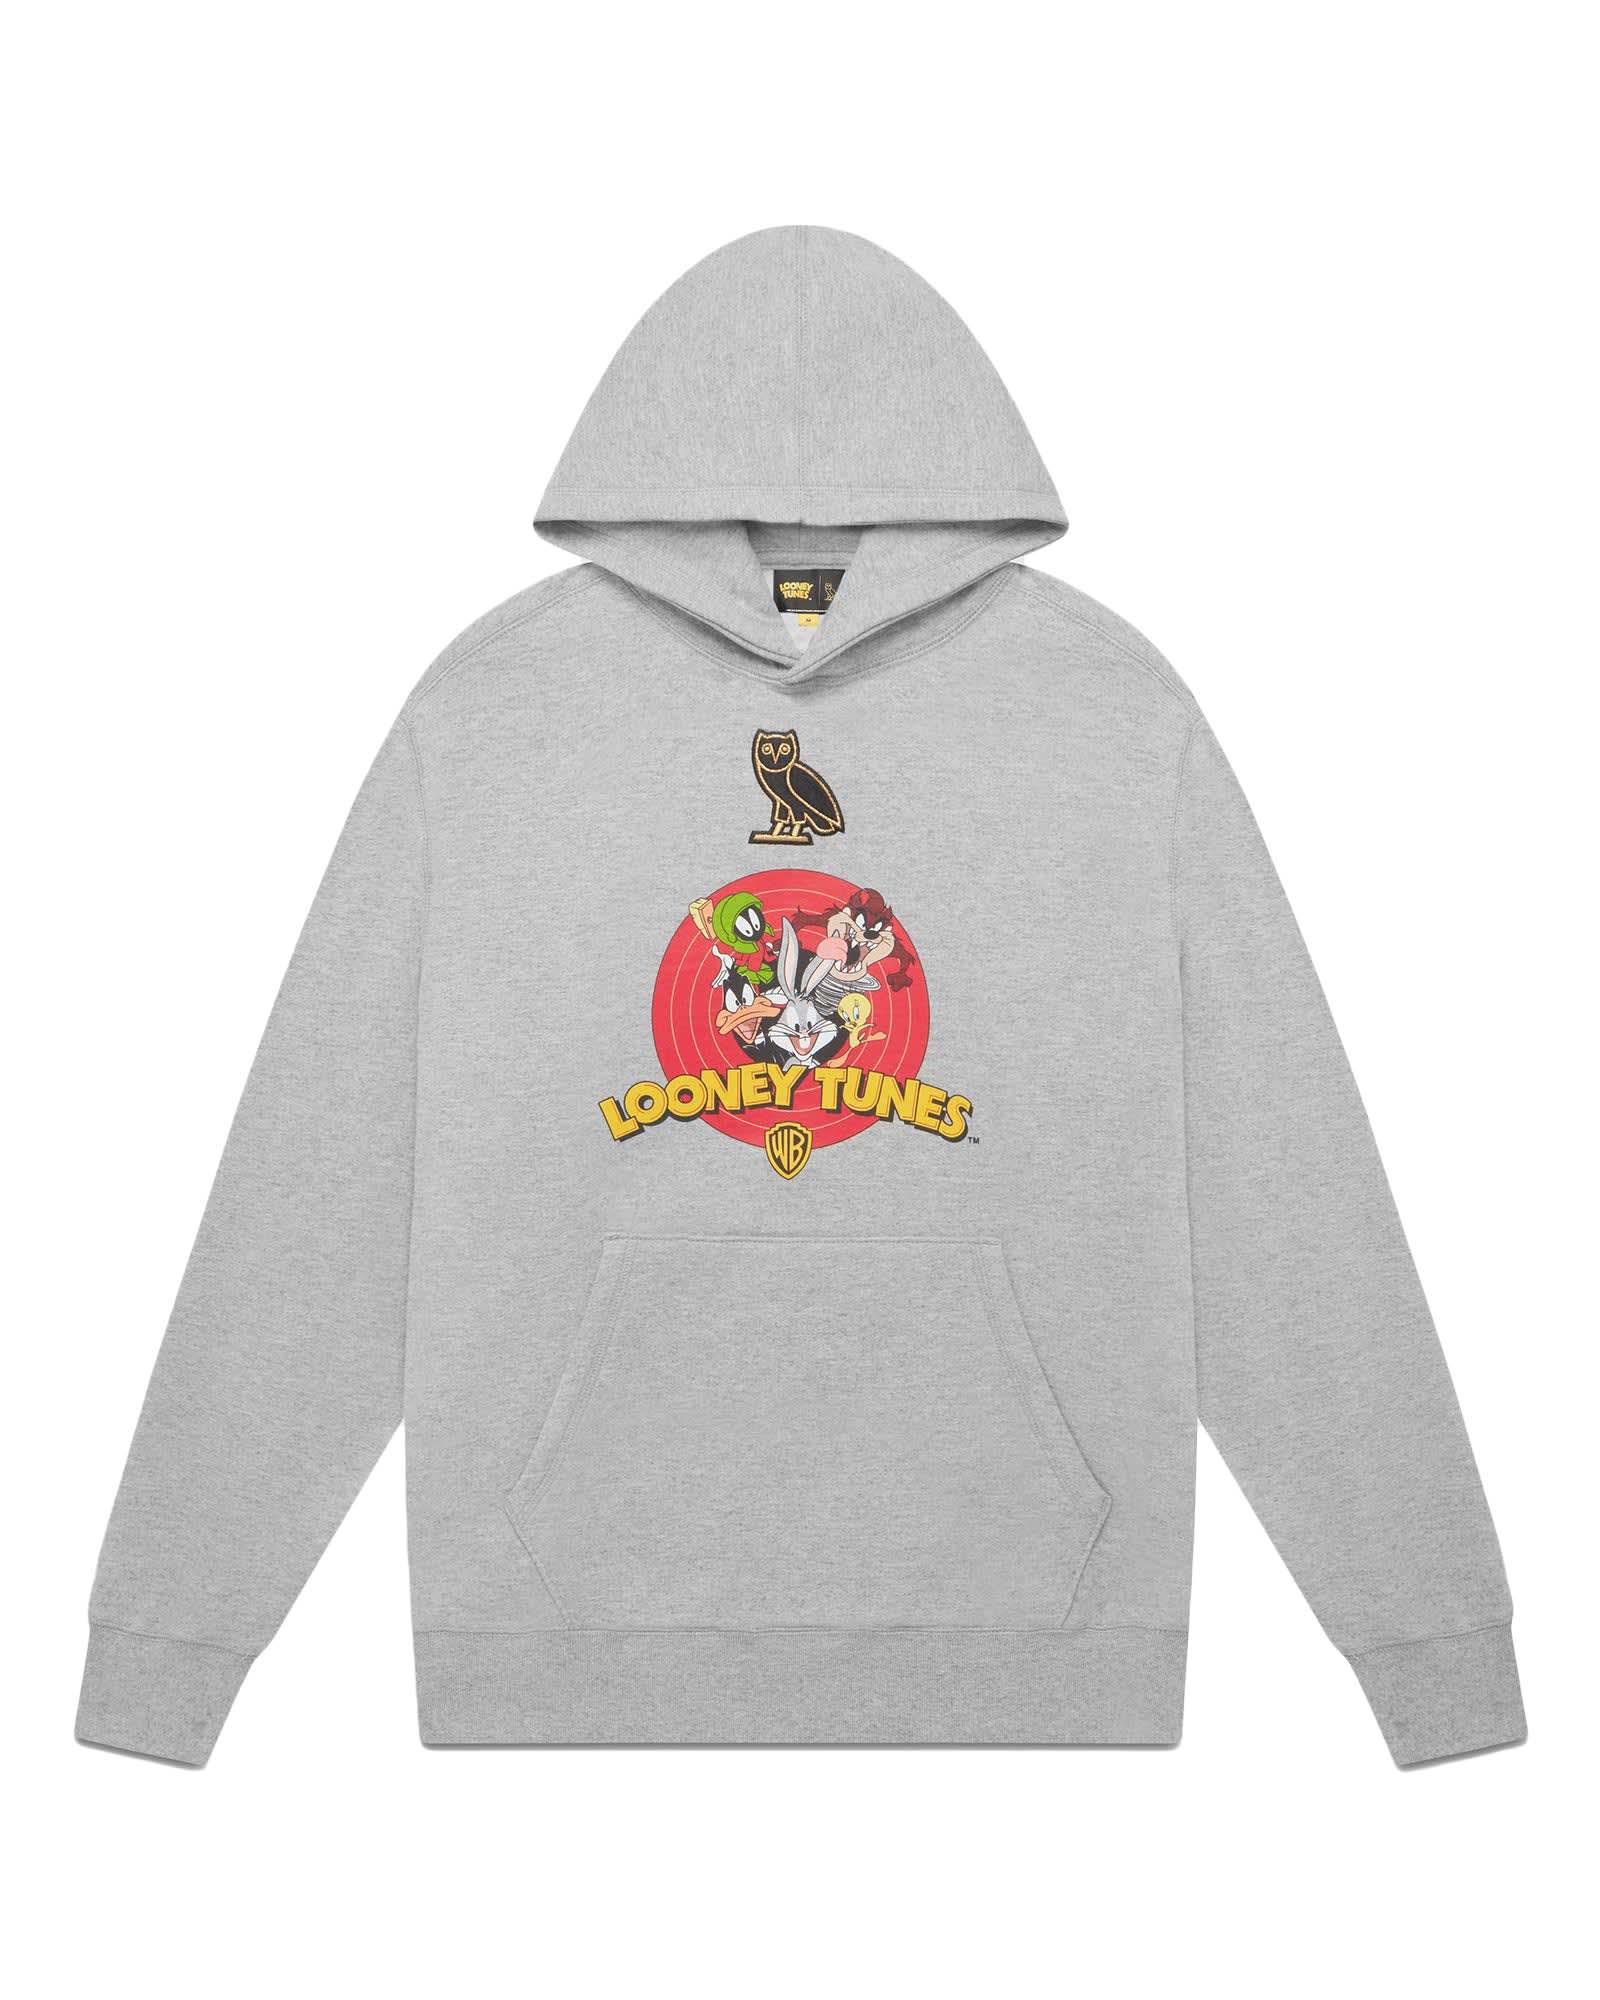 Kith x Looney Tunes That's All Folks Hoodie Black Men's - SS20 - US